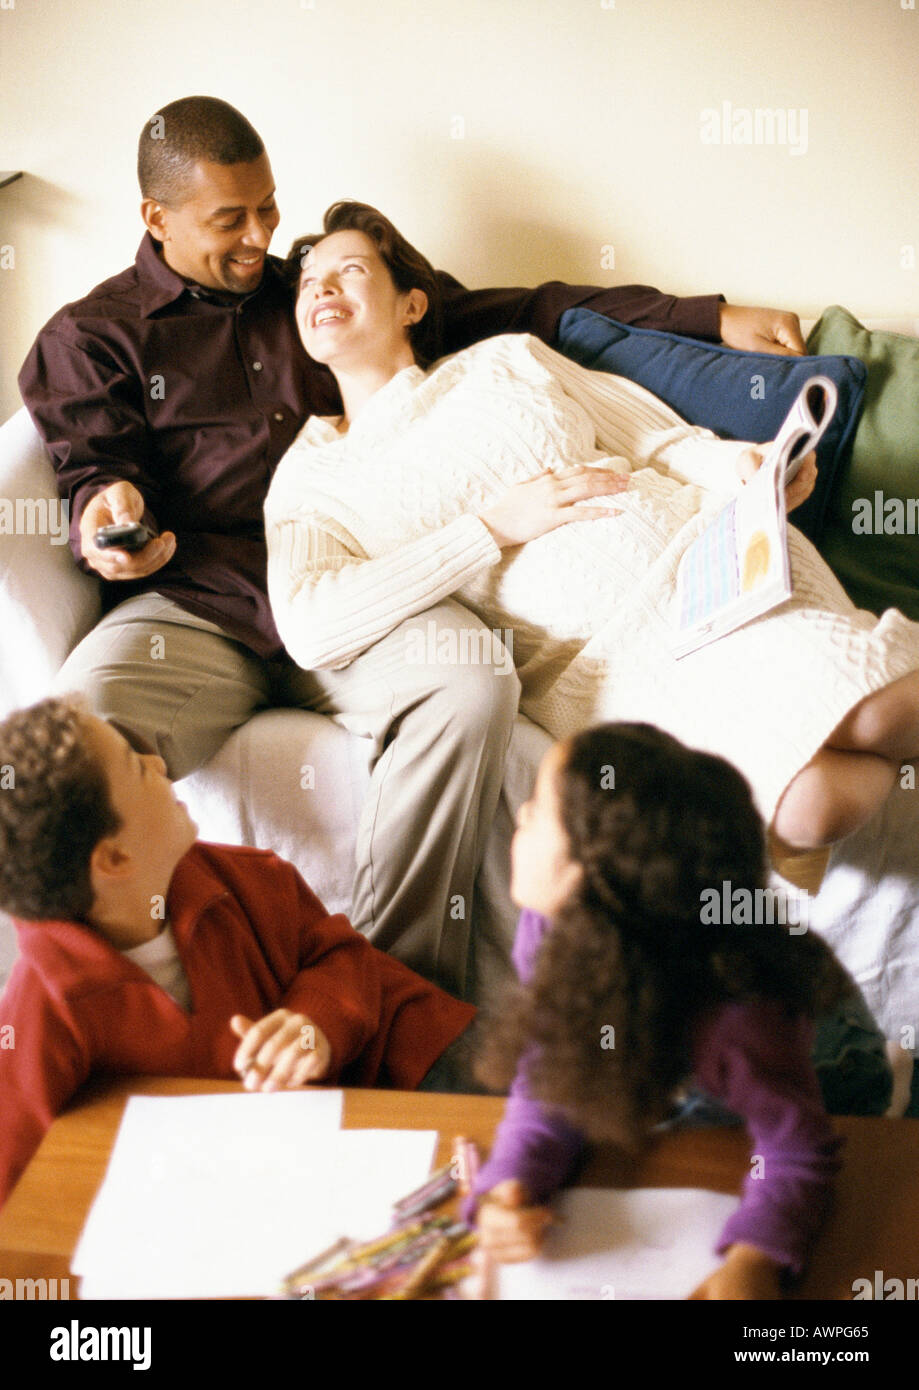 Man and pregnant woman on sofa, children looking over shoulders at them Stock Photo